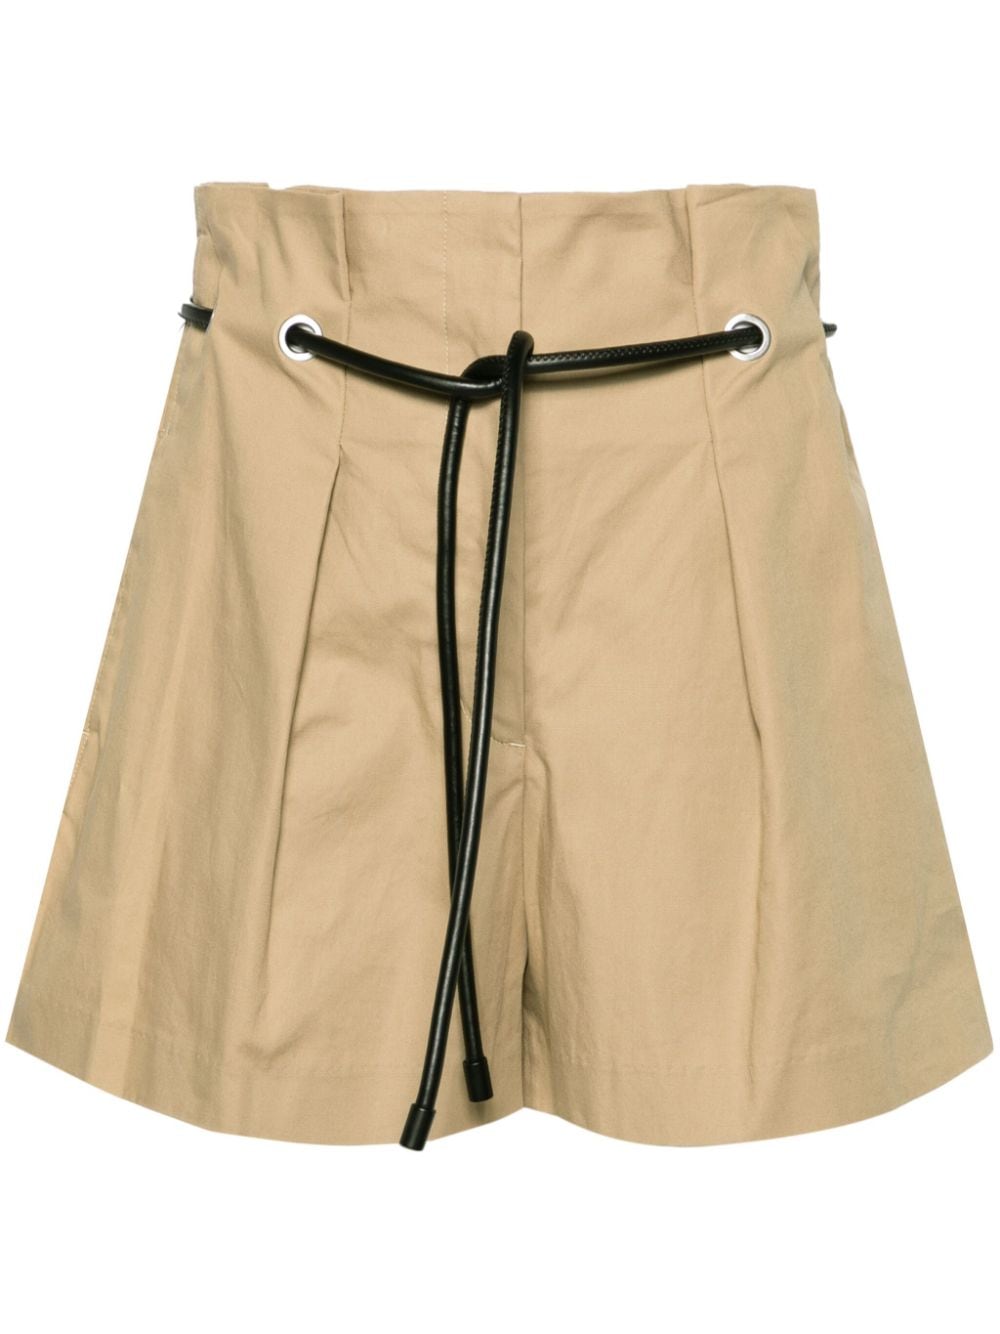 3.1 Phillip Lim / フィリップ リム Origami Belted Shorts In Khaki